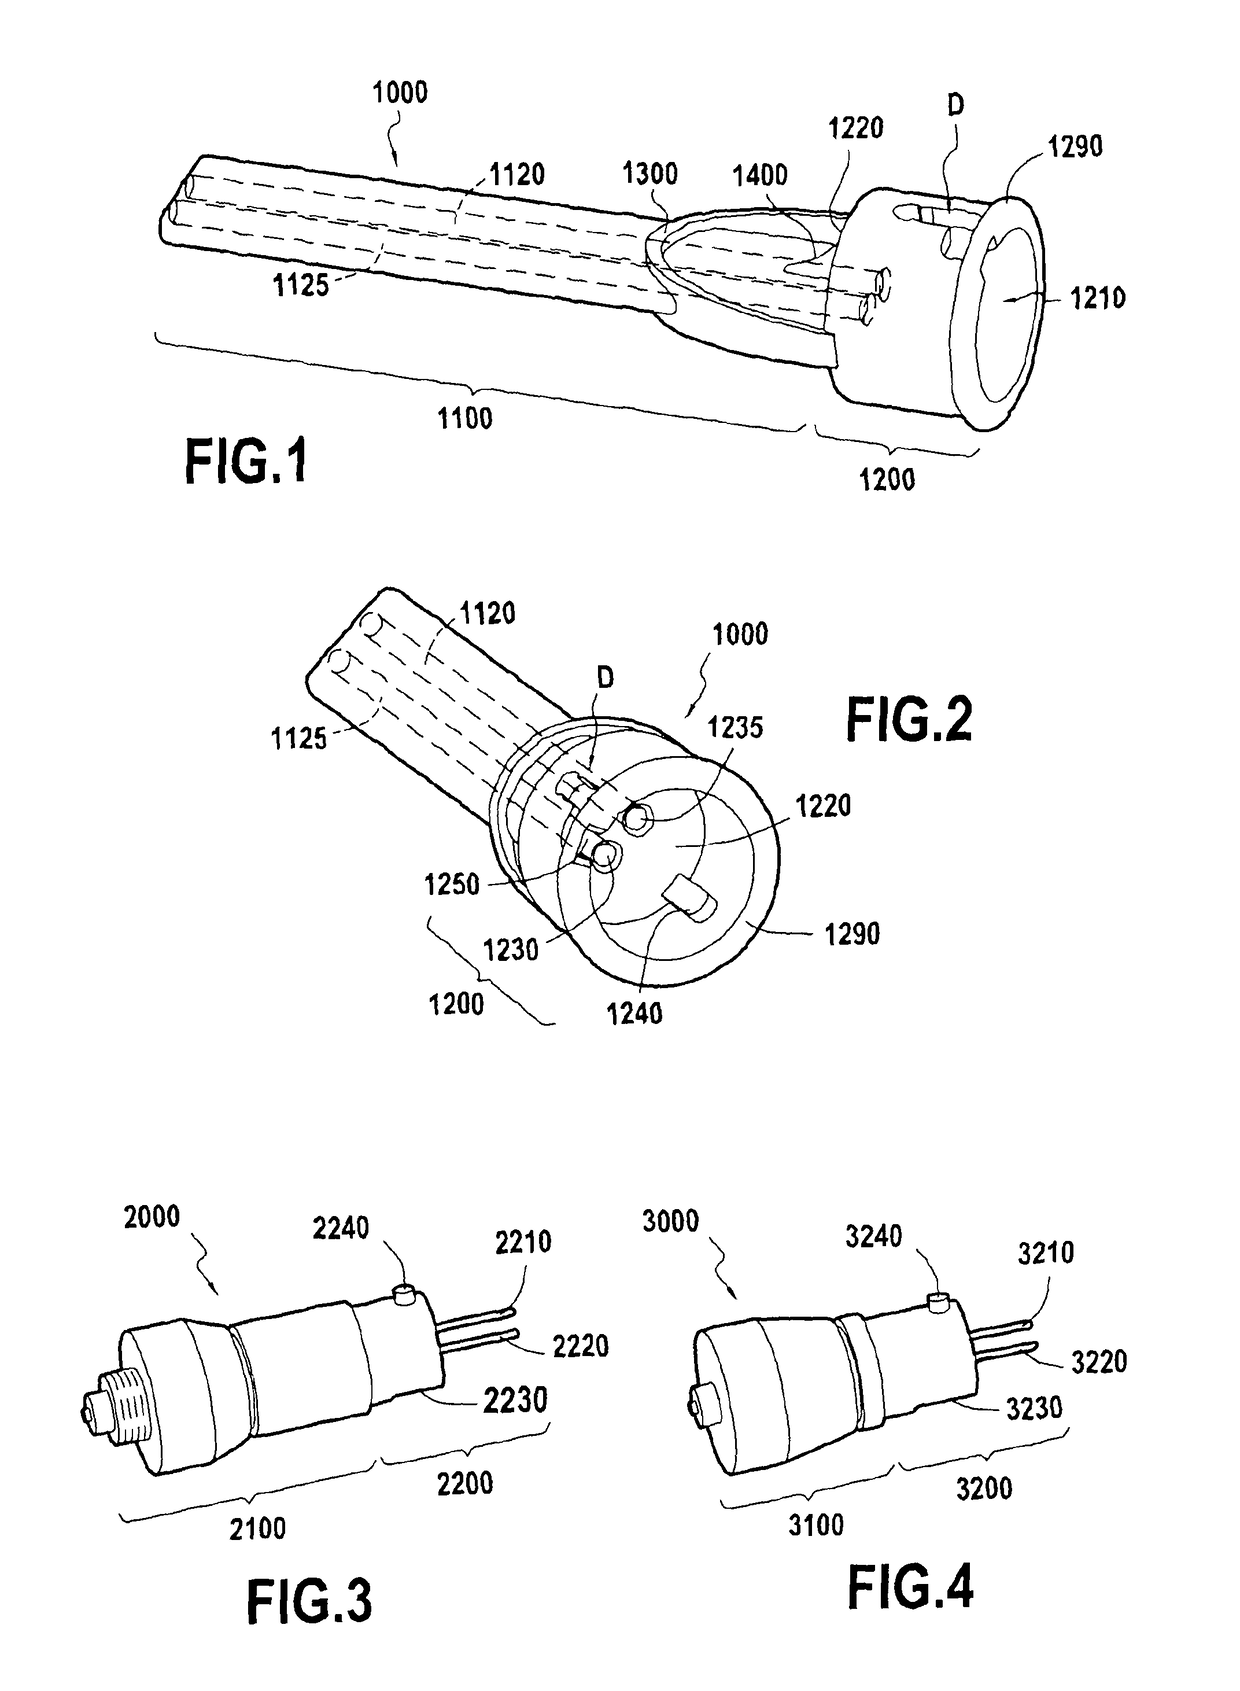 Cannula and adapter for multifunction syringe